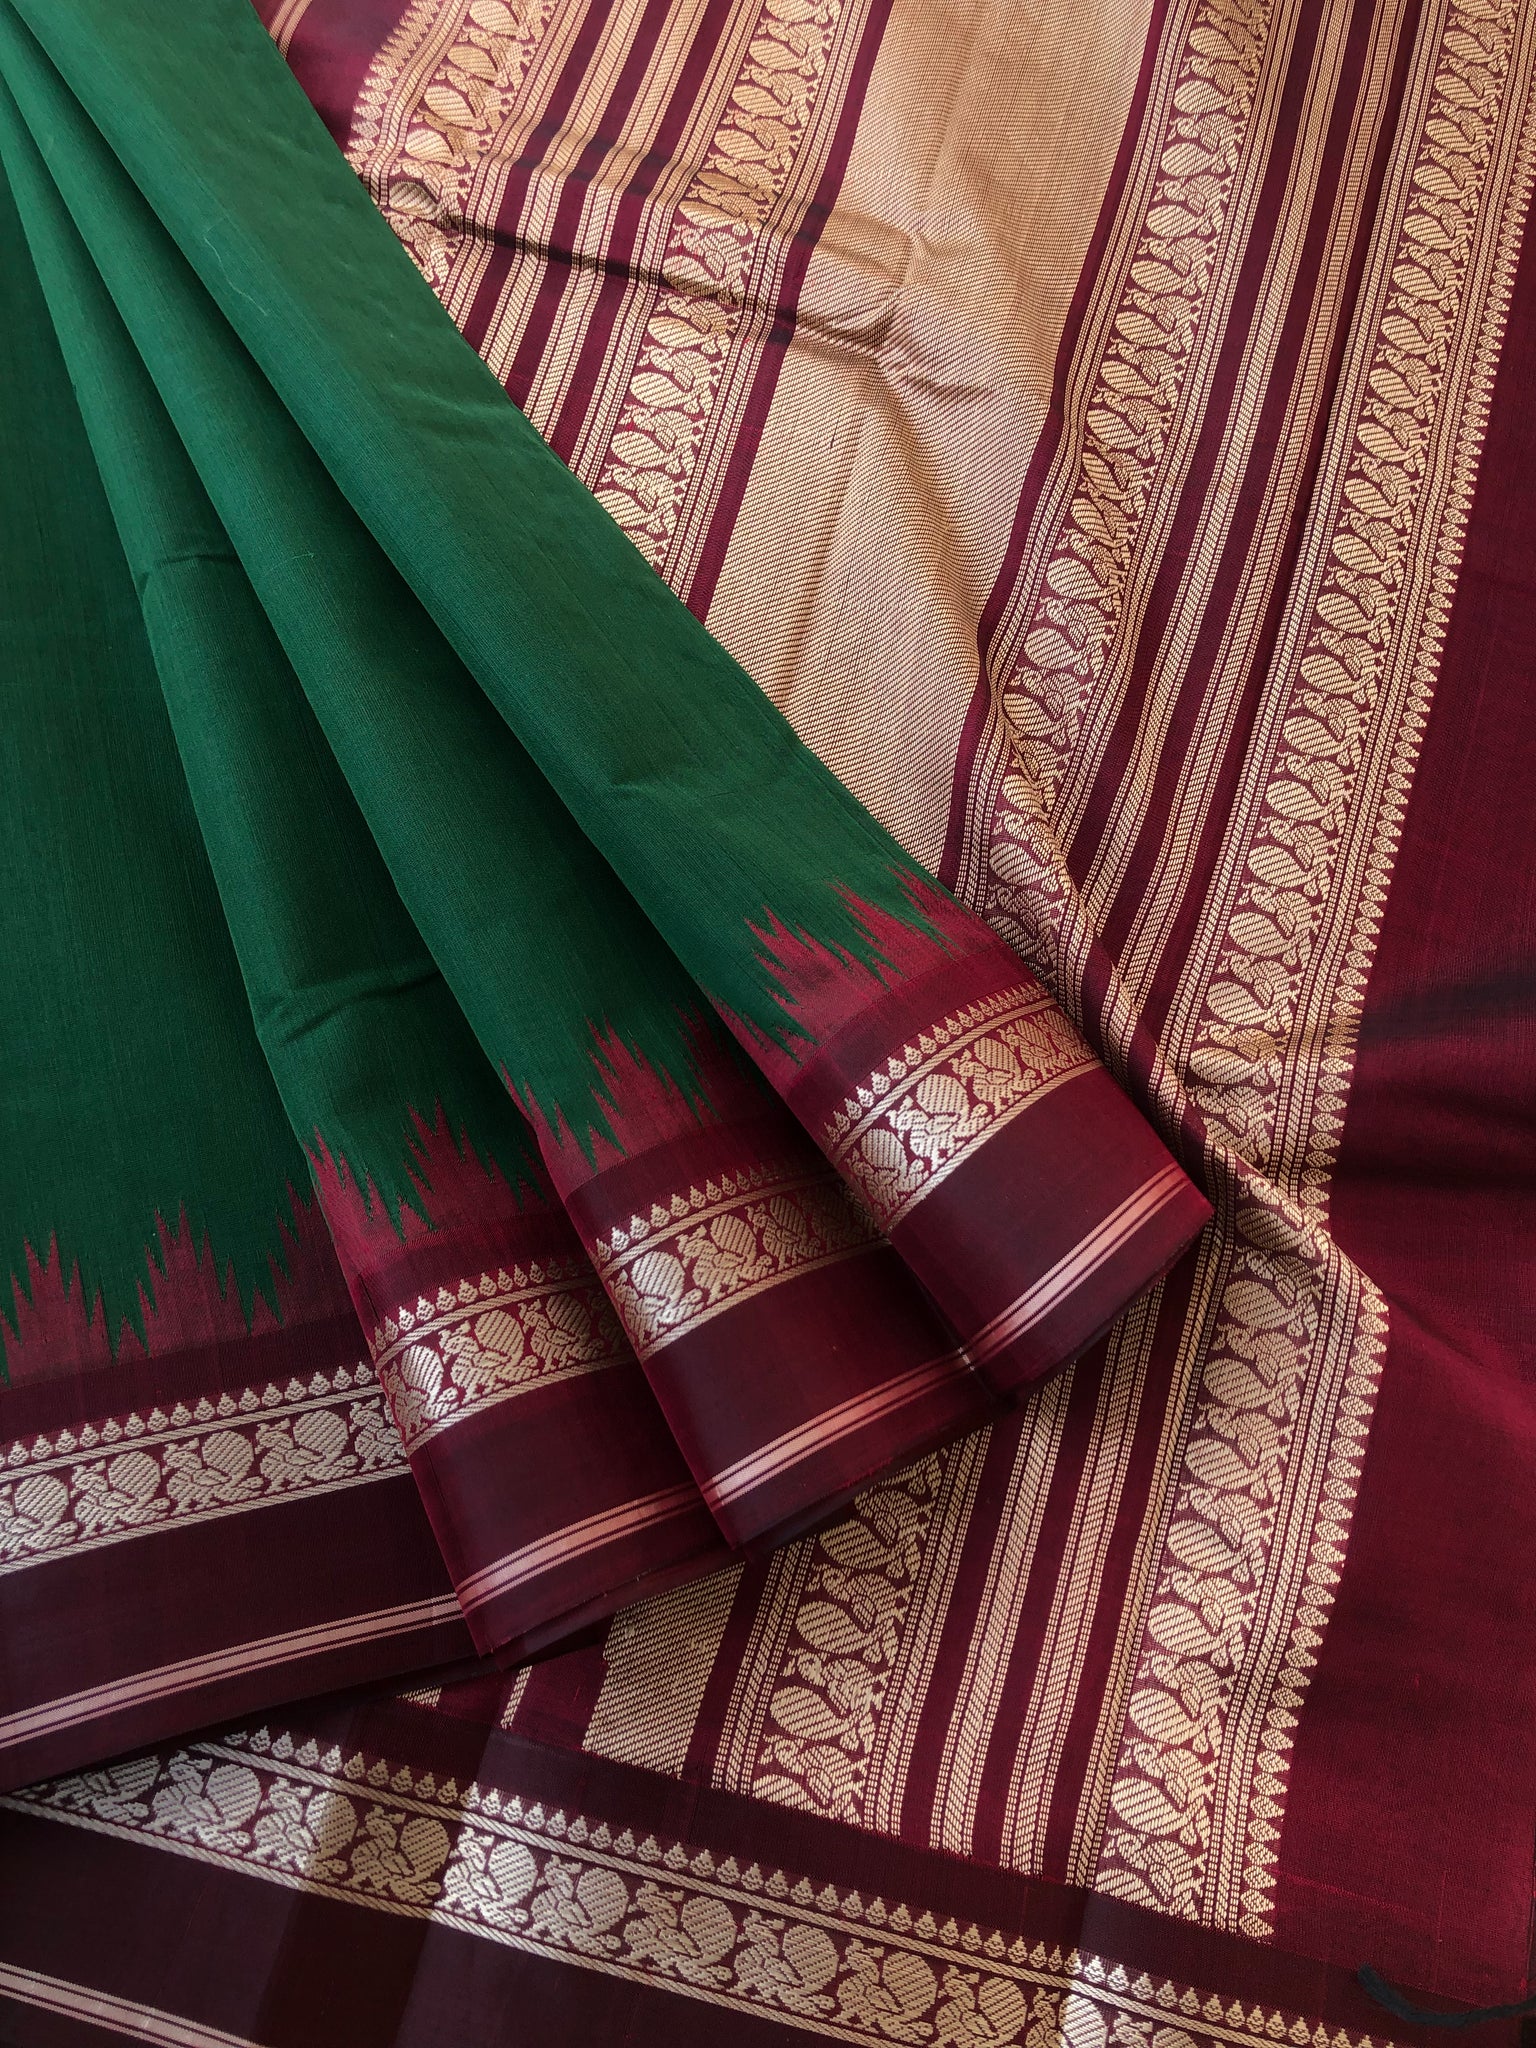 Cotton body with Pure Silk Borders - most traditional deepest Meenakshi green and maroon